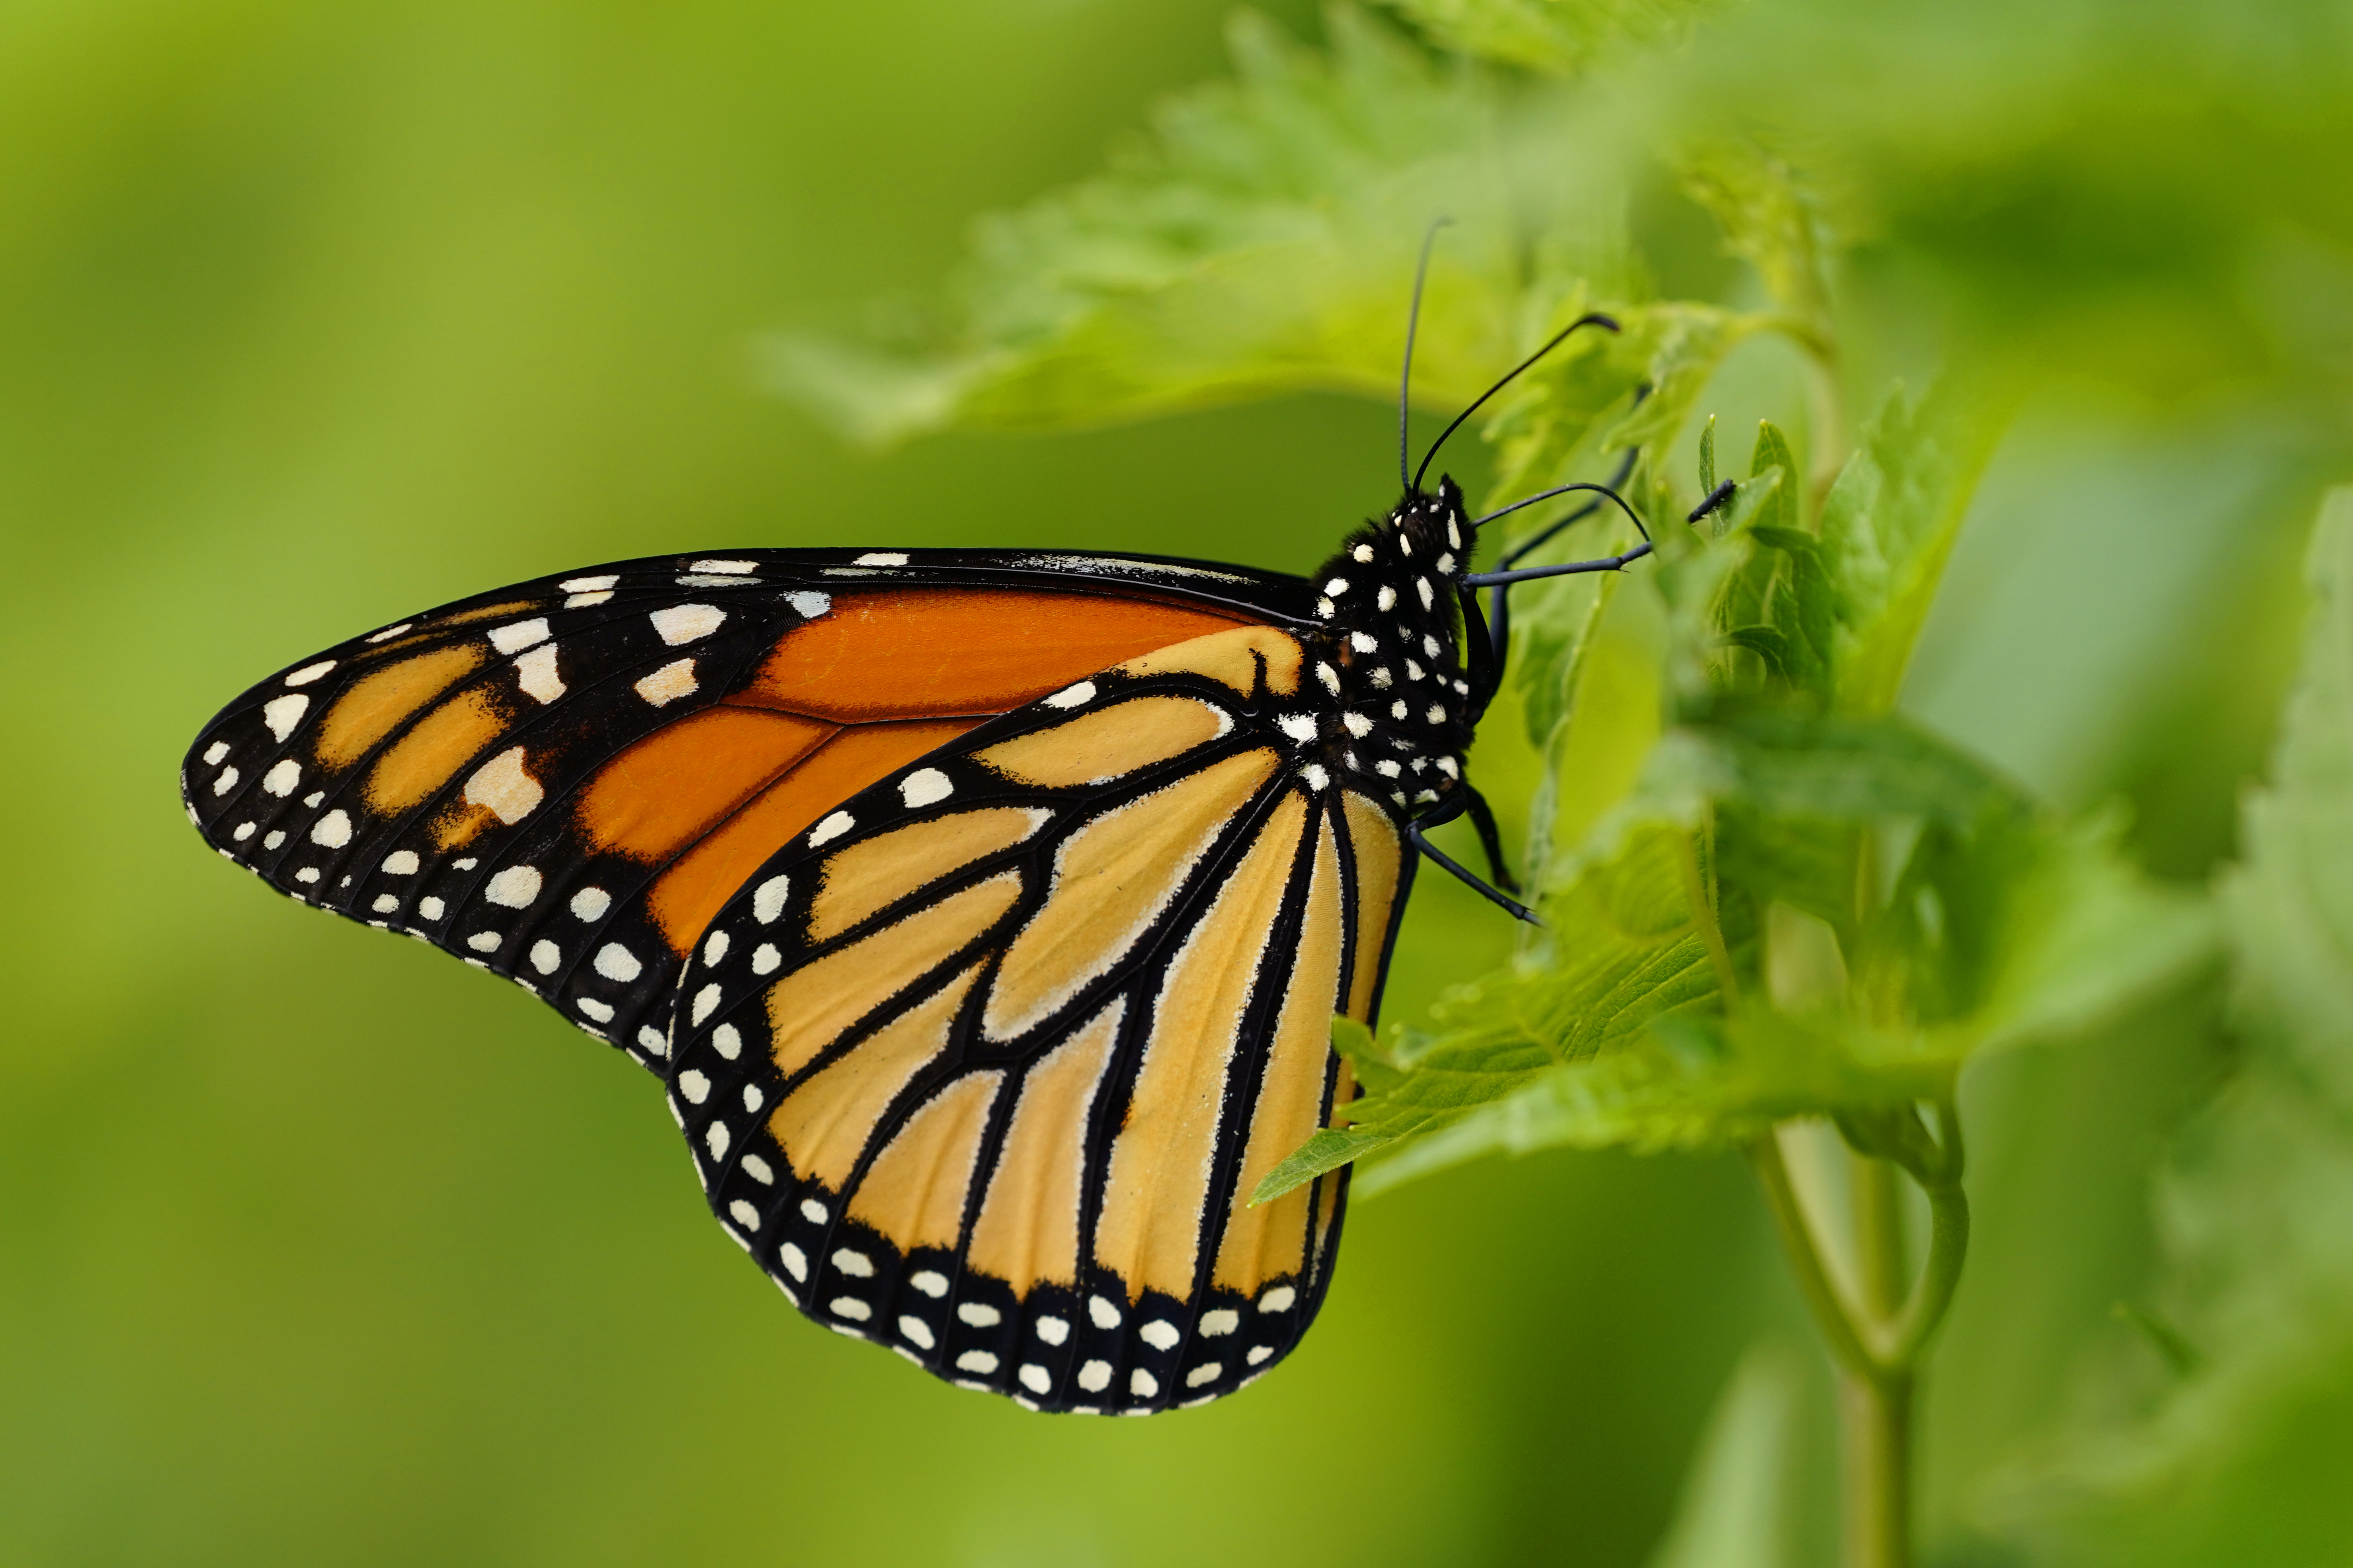 Western monarch butterfly numbers in California dropped by 30% last year,  researchers say